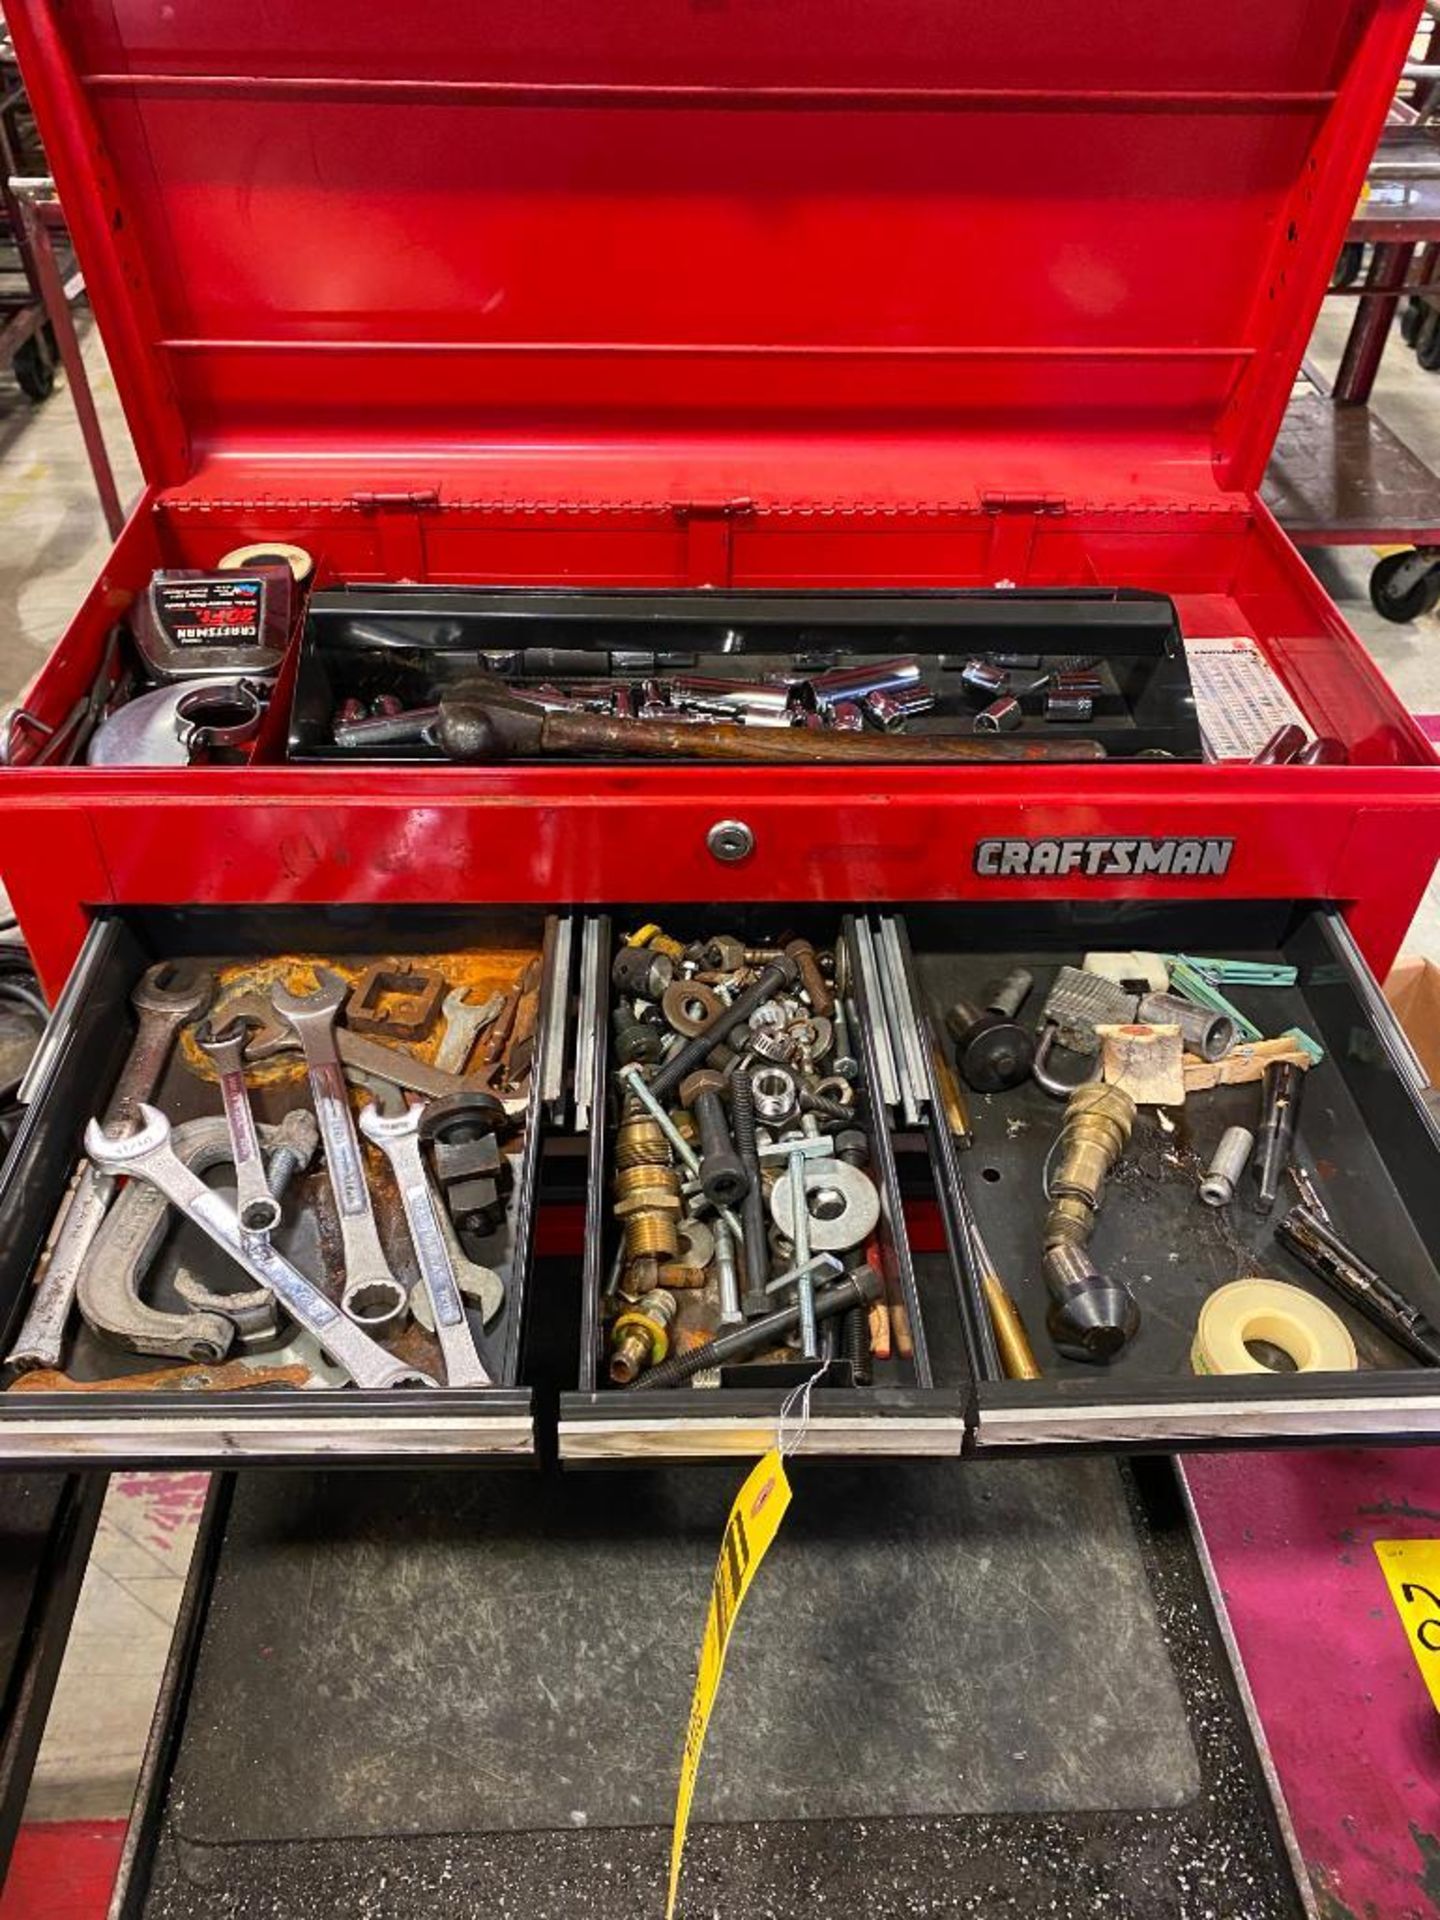 Craftsman Toolbox w/ Tool Content - Image 2 of 3